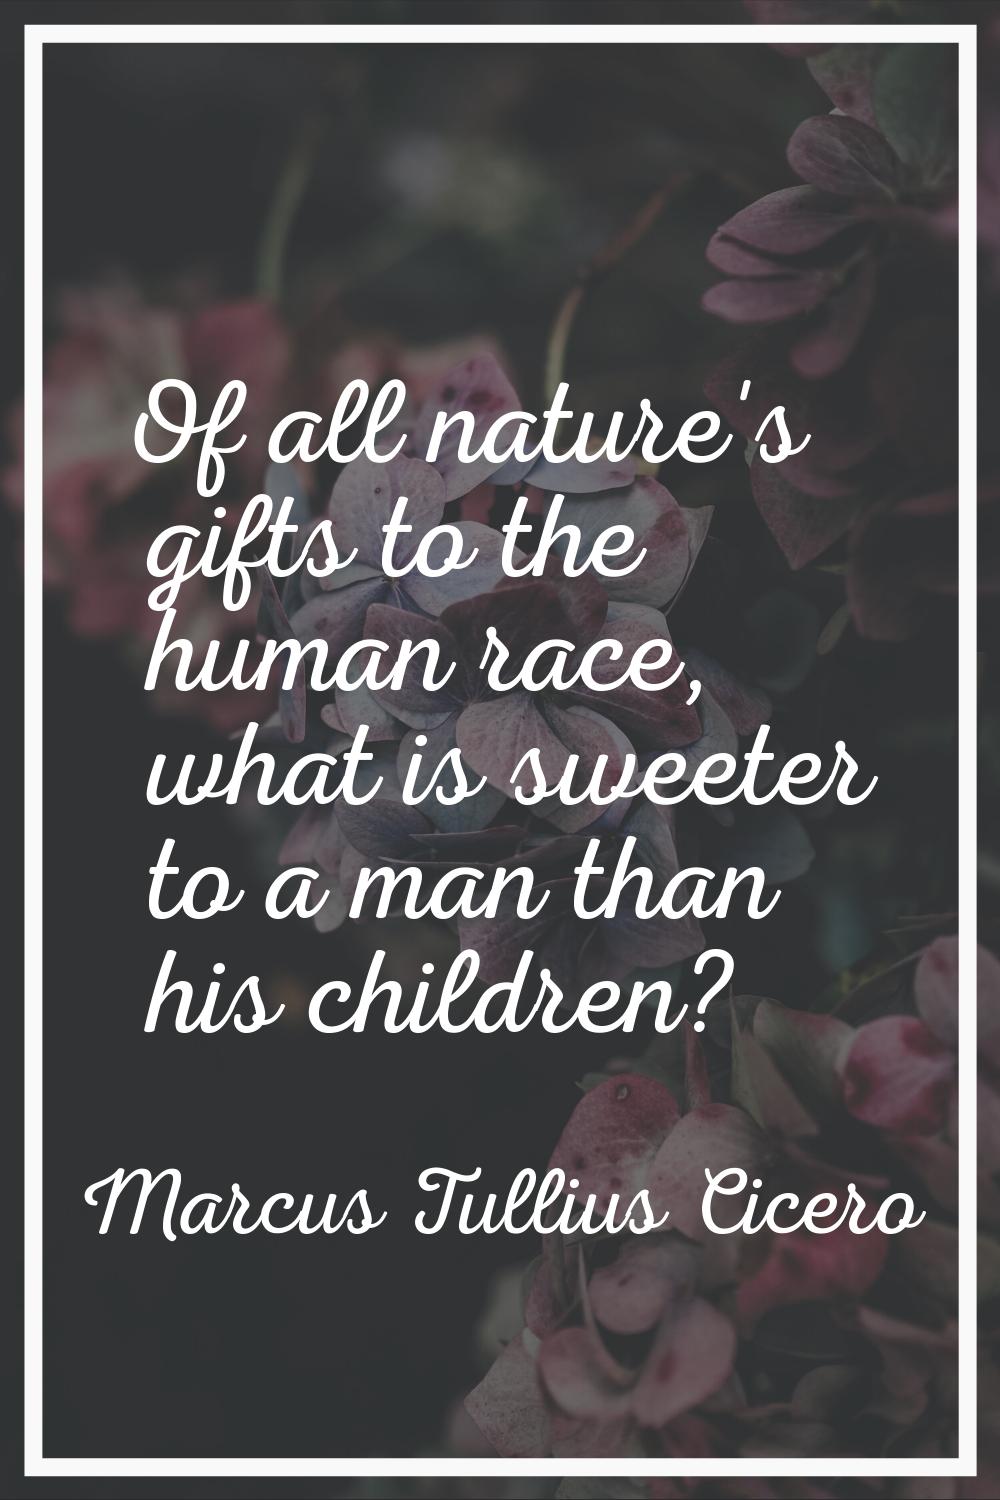 Of all nature's gifts to the human race, what is sweeter to a man than his children?